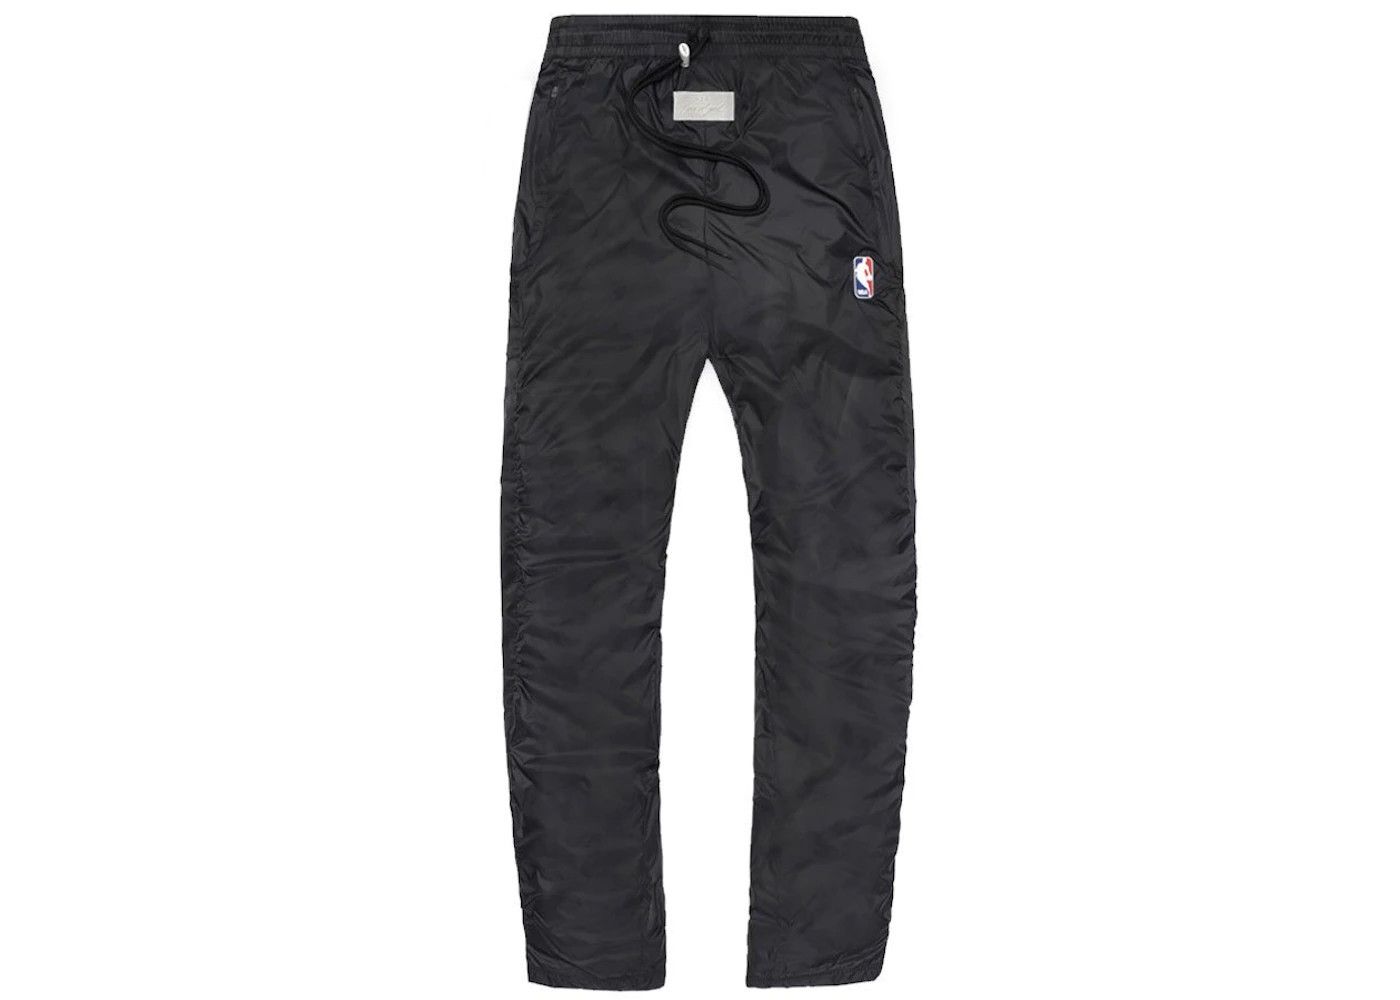 Nike Warm Up Pants in Size XS Size US 28 / EU 44 - 1 Preview